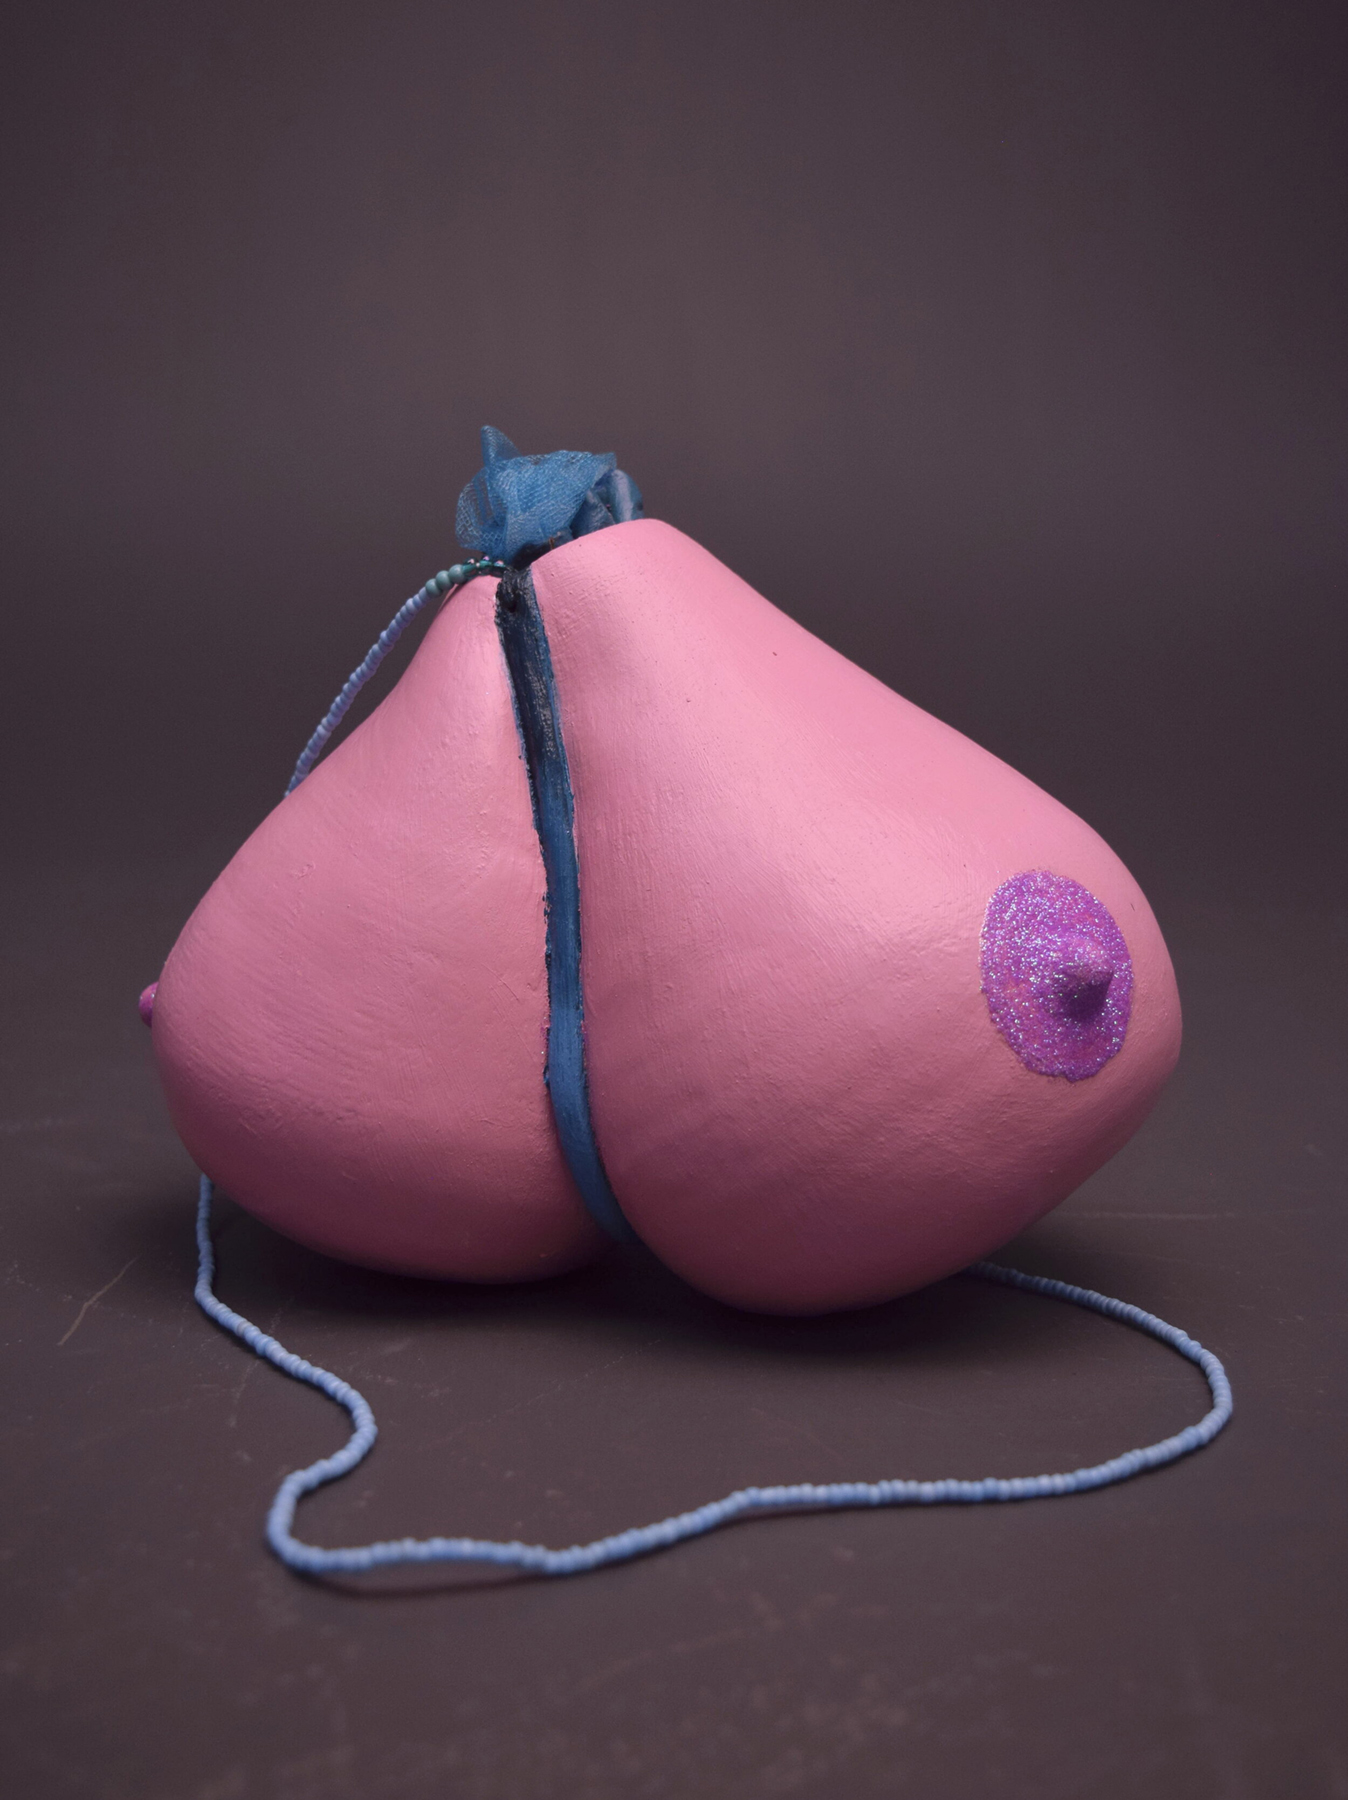 Purse in the shape of breasts, courtesy of the artist